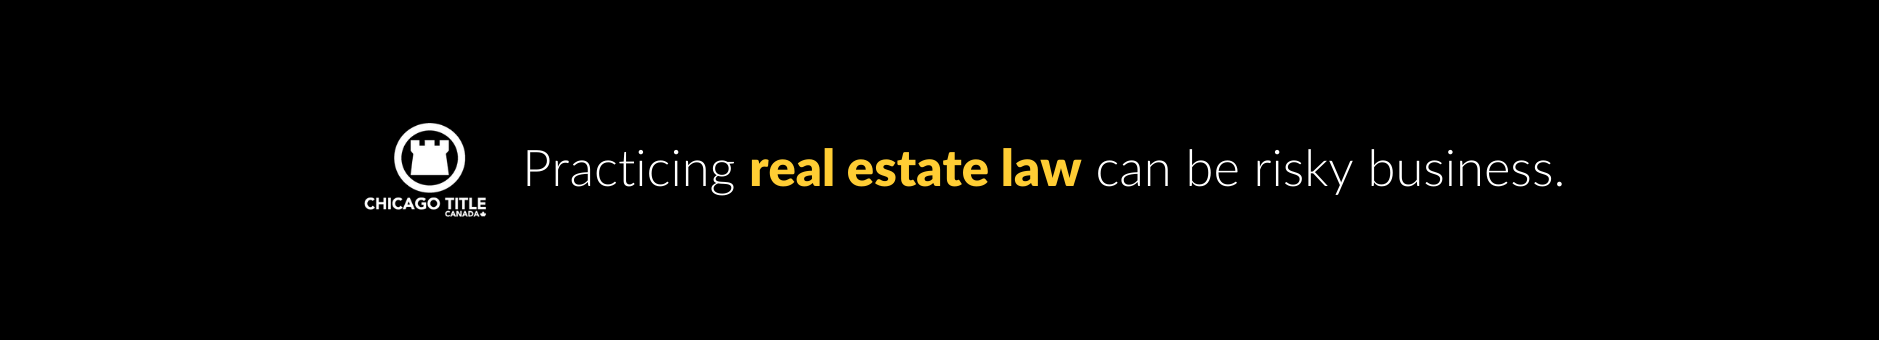 The words 'Practicing real estate law can be risky business.' on a black background. 